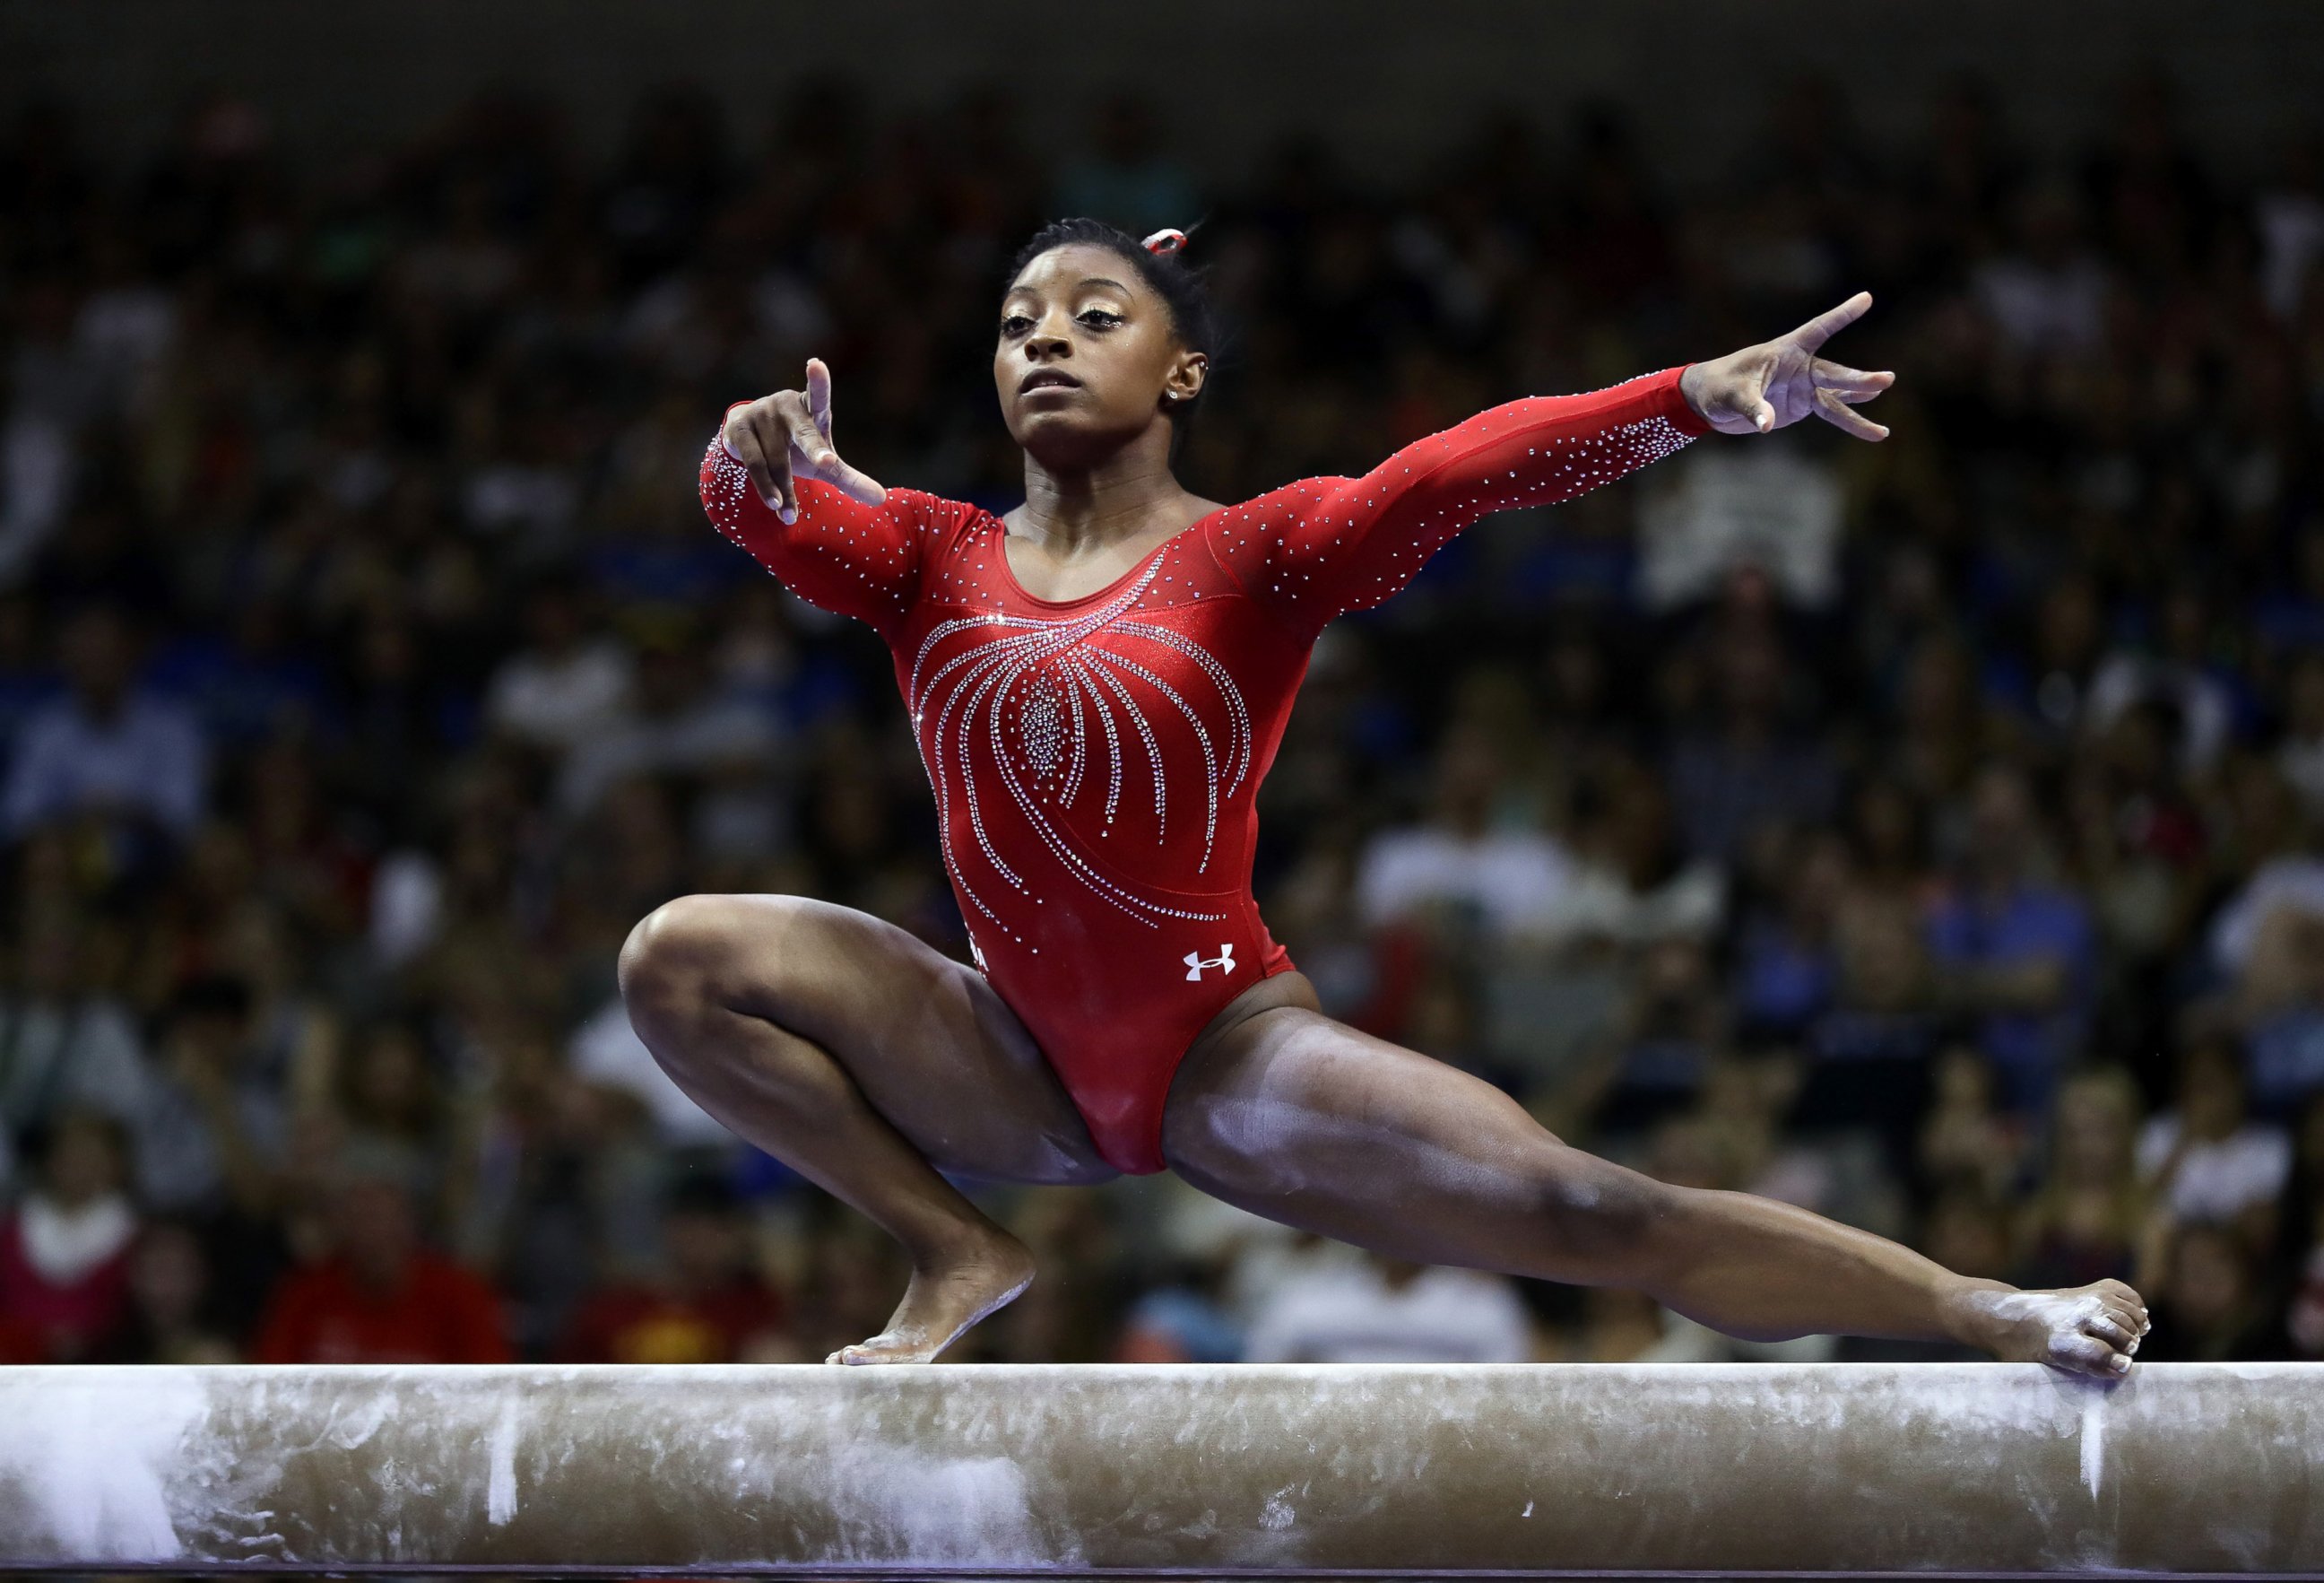 PHOTO: Simone Biles competes on the balance beam during Day 2 of the 2016 U.S. Women's Gymnastics Olympic Trials at SAP Center, July 10, 2016 in San Jose, California.  